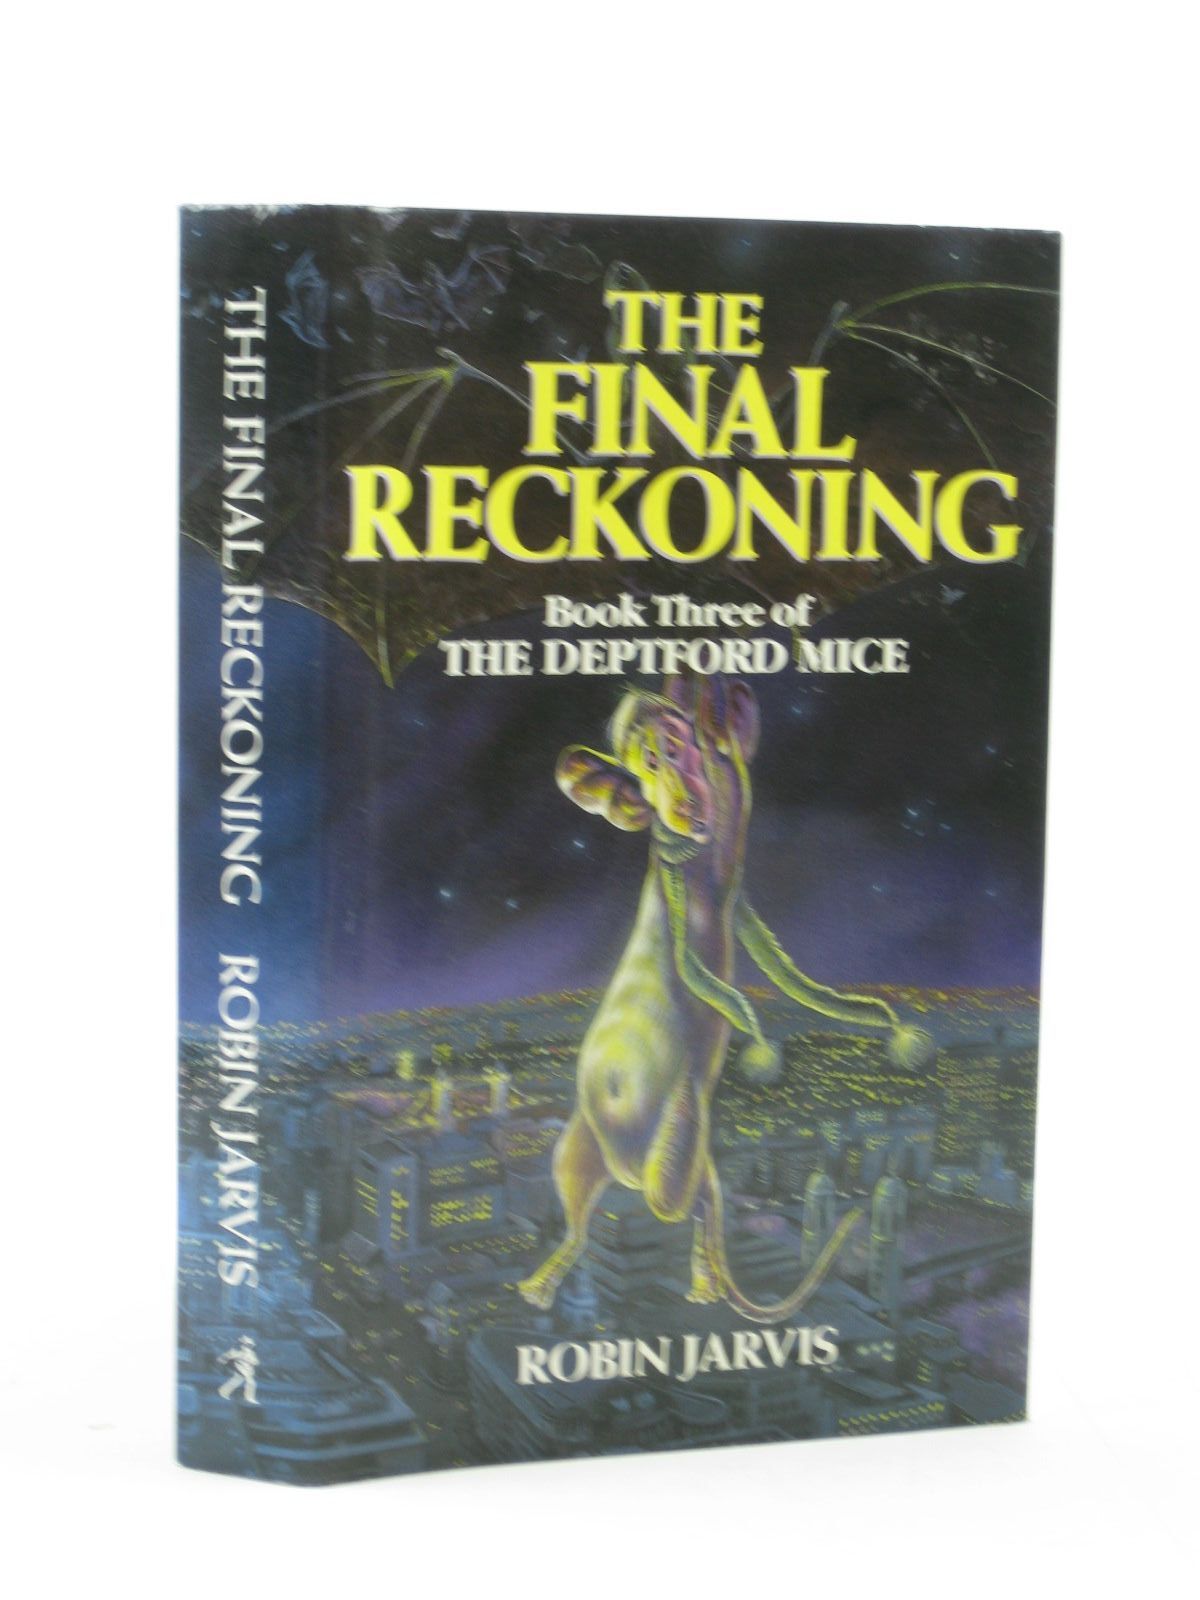 Photo of THE FINAL RECKONING written by Jarvis, Robin illustrated by Jarvis, Robin published by Simon & Schuster Young Books (STOCK CODE: 1313396)  for sale by Stella & Rose's Books